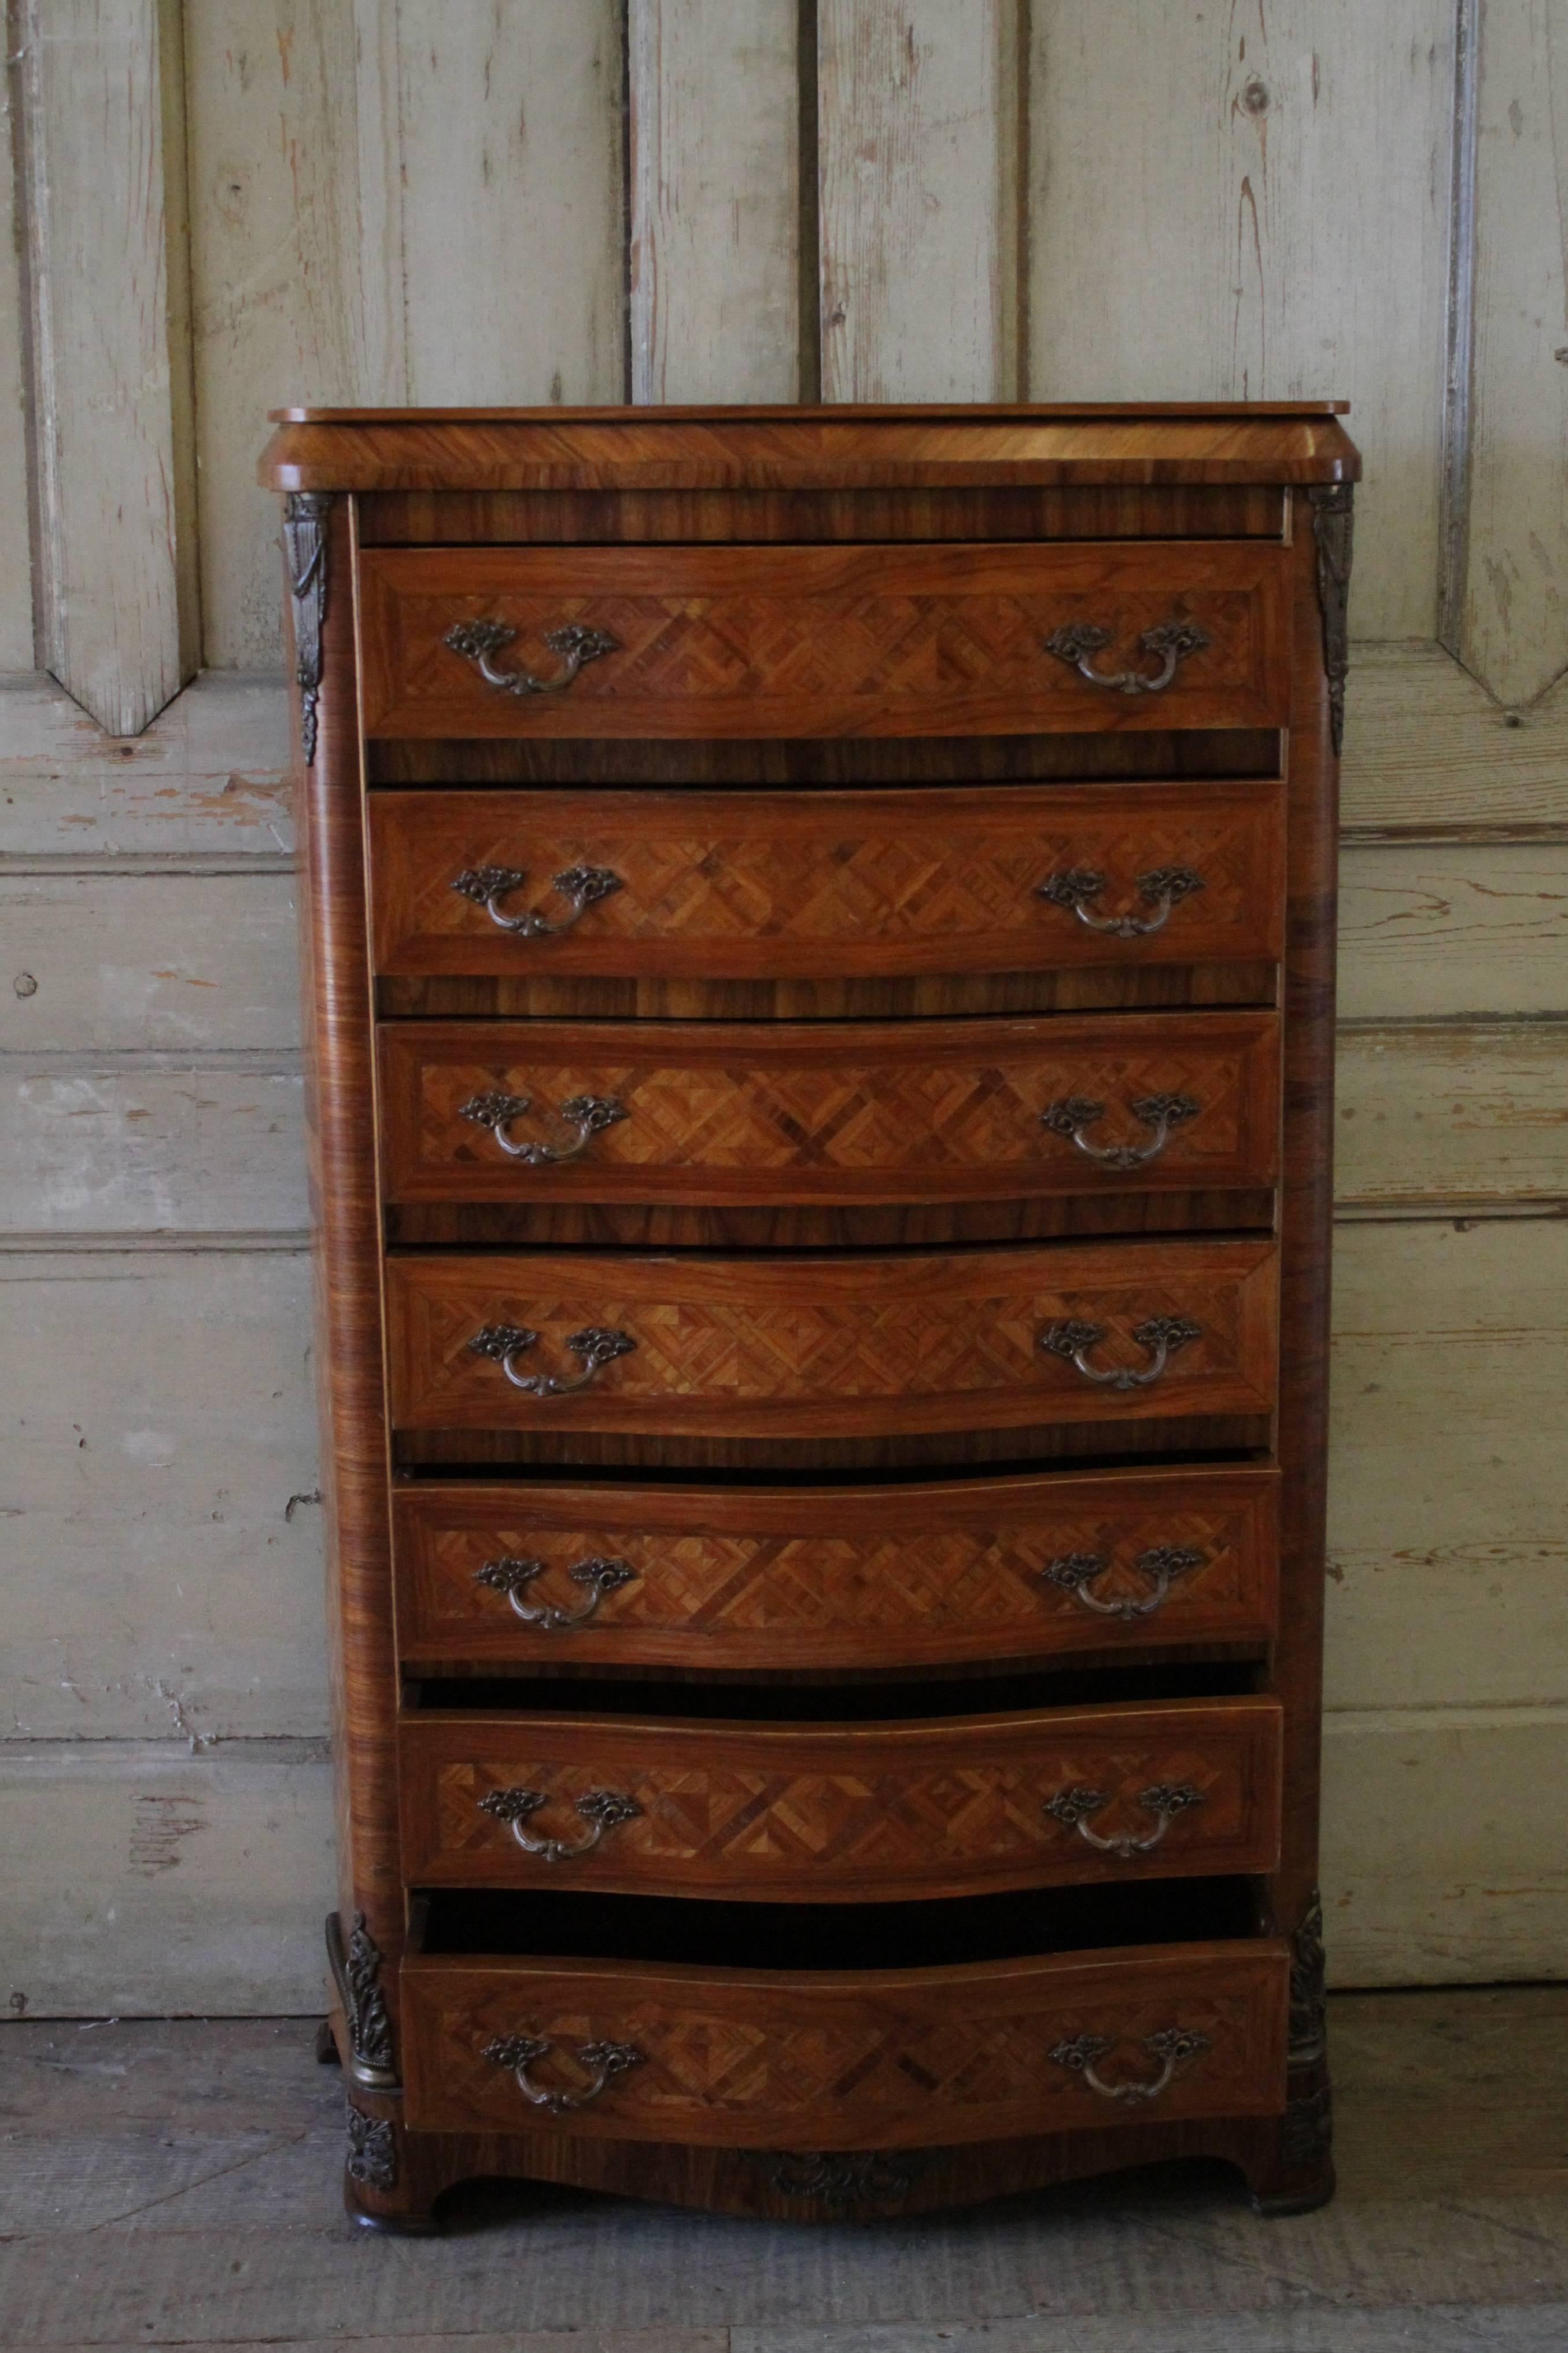 Beautiful lingerie chest with decorative diamond pattern inlays, bronze-mounted ormolus and pulls. This seven drawer chest drawers open and close with ease, and have a nice dovetail finish. Overall in good condition, some areas of the inlay has a